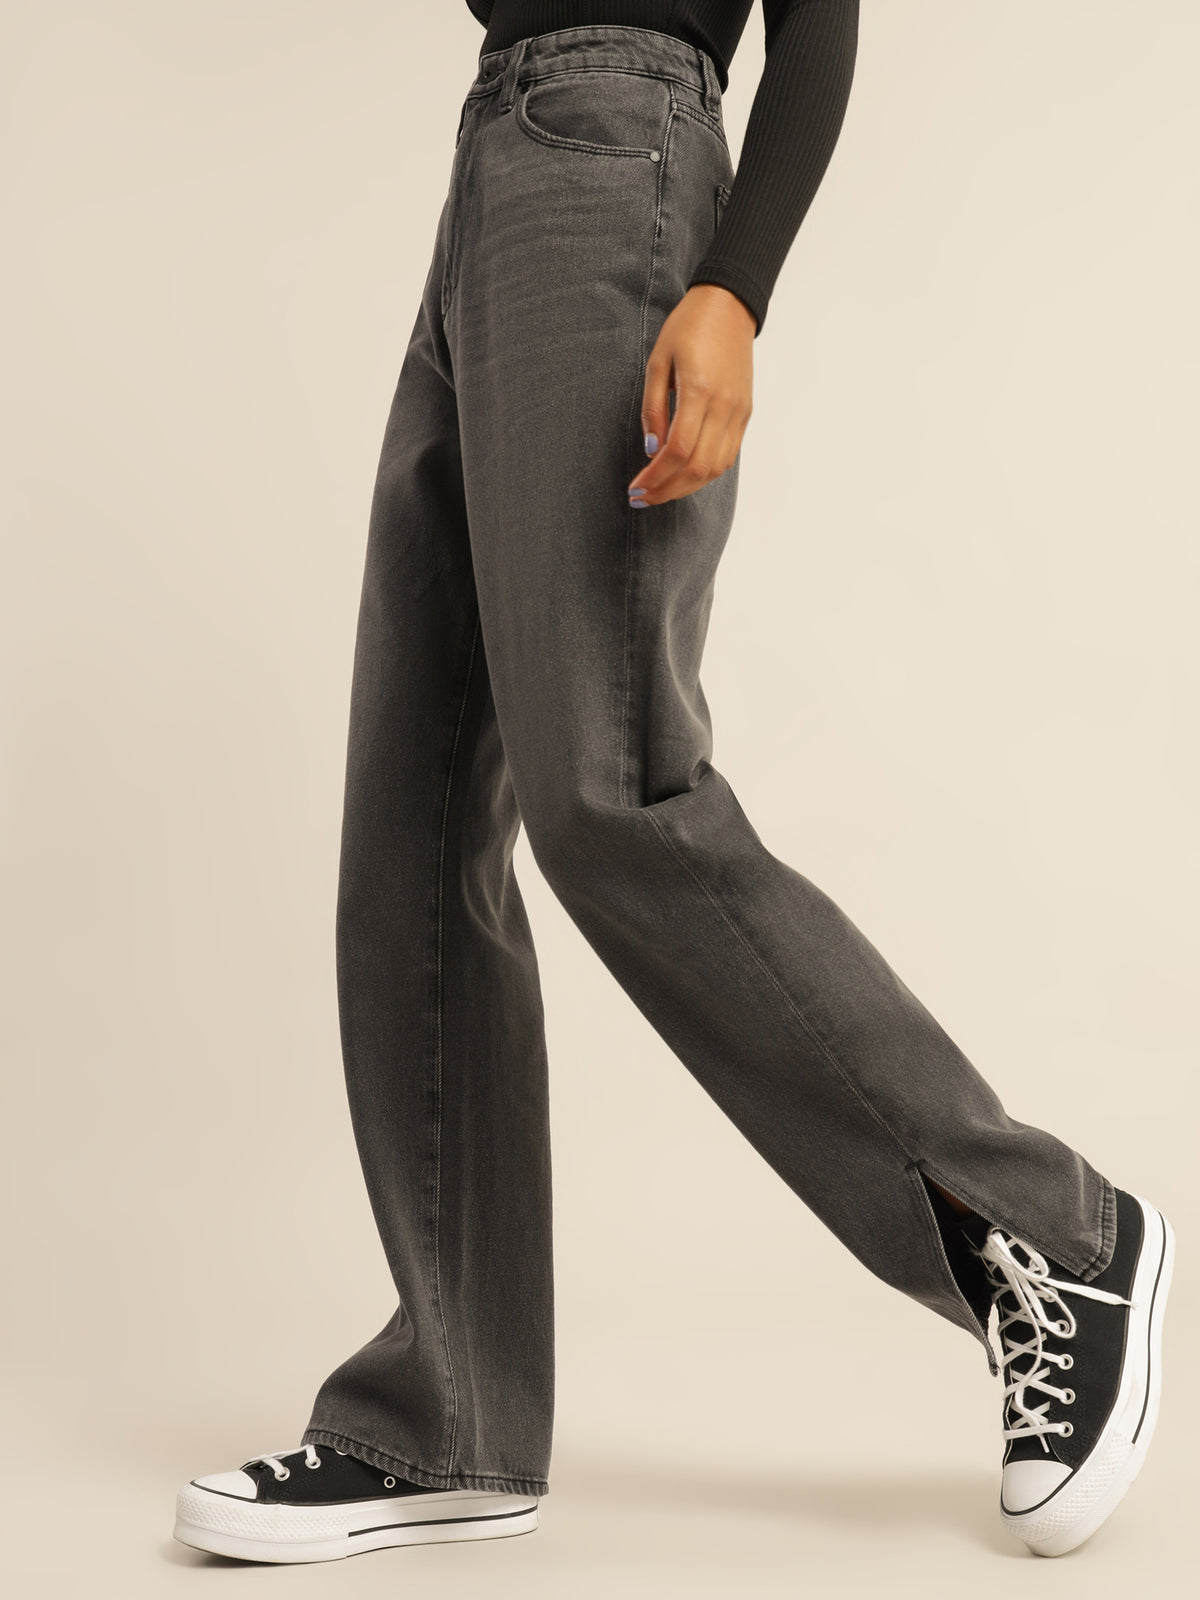 Hailey Baggy Split Jeans in Washed Black